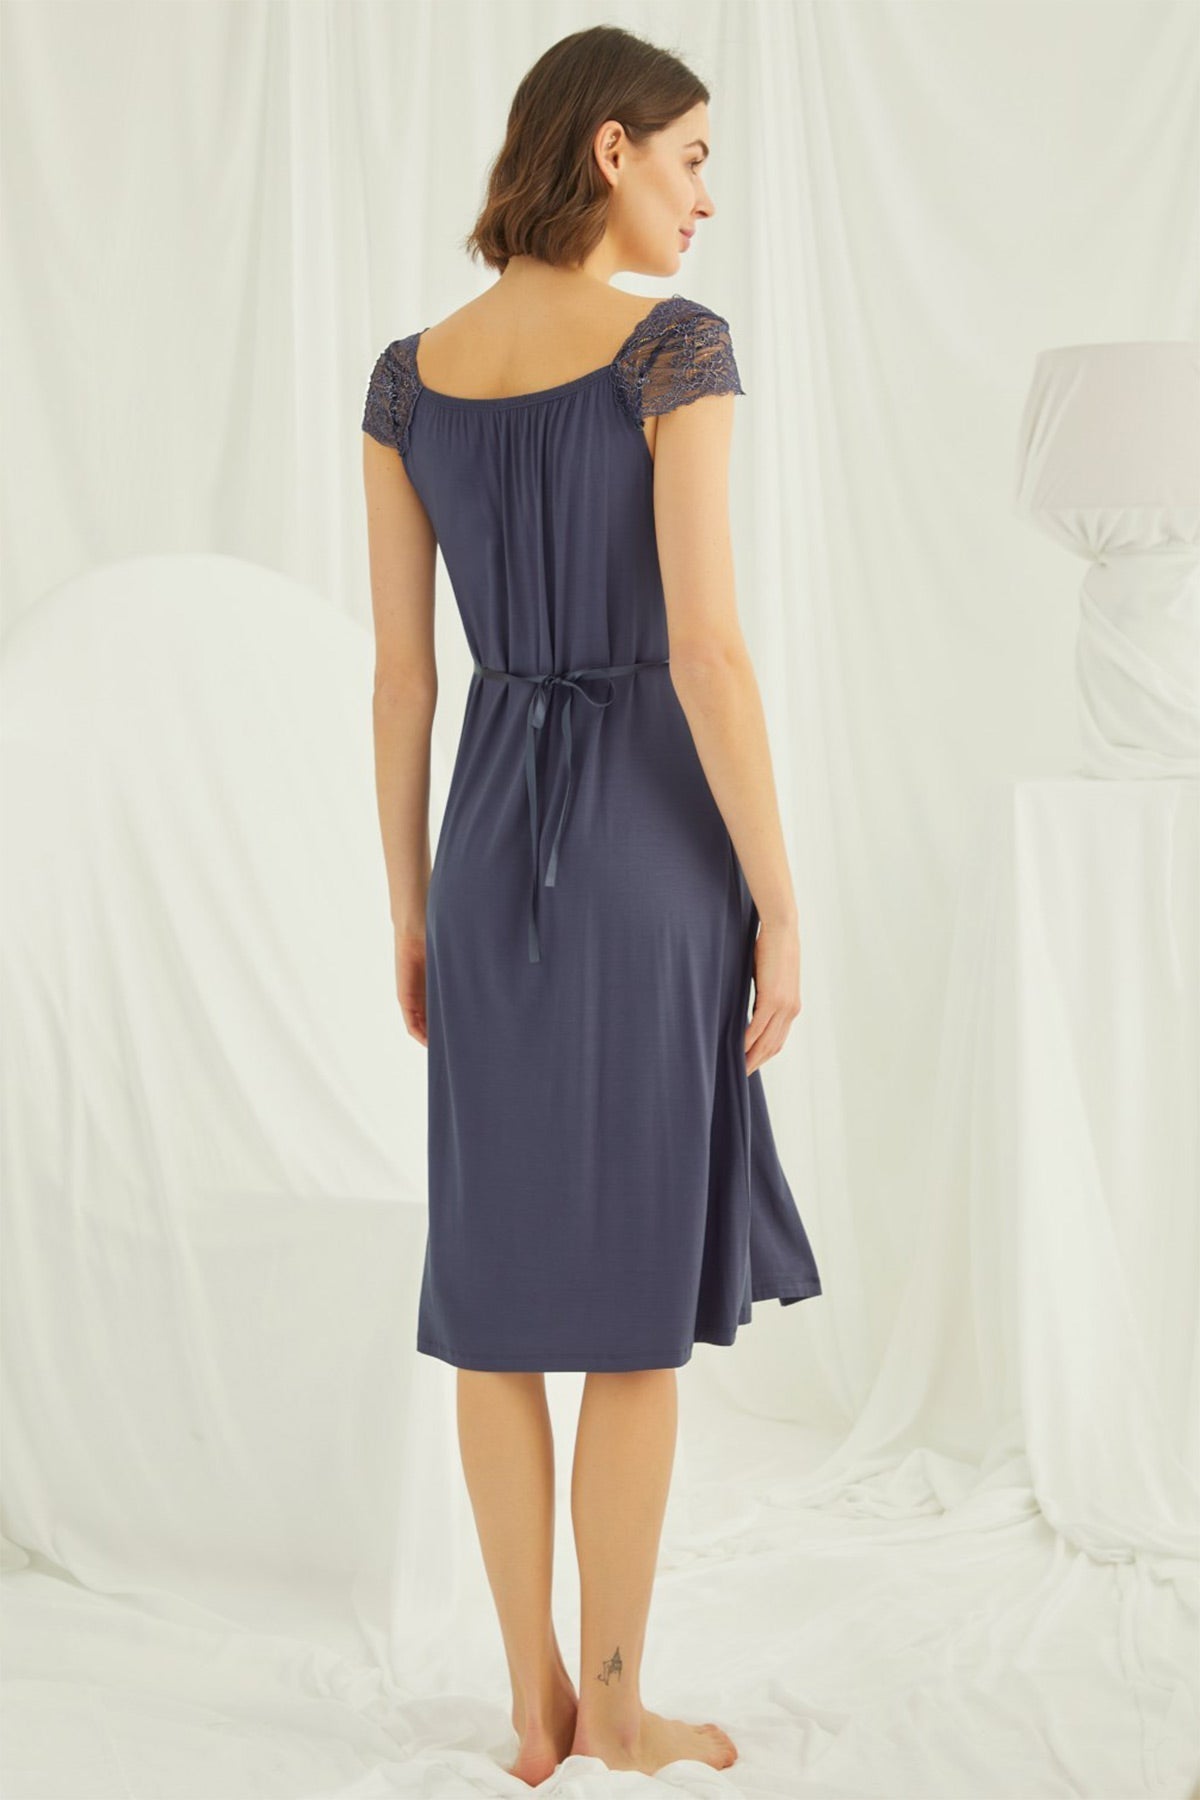 Lace Maternity & Nursing Nightgown Navy Blue - 18302